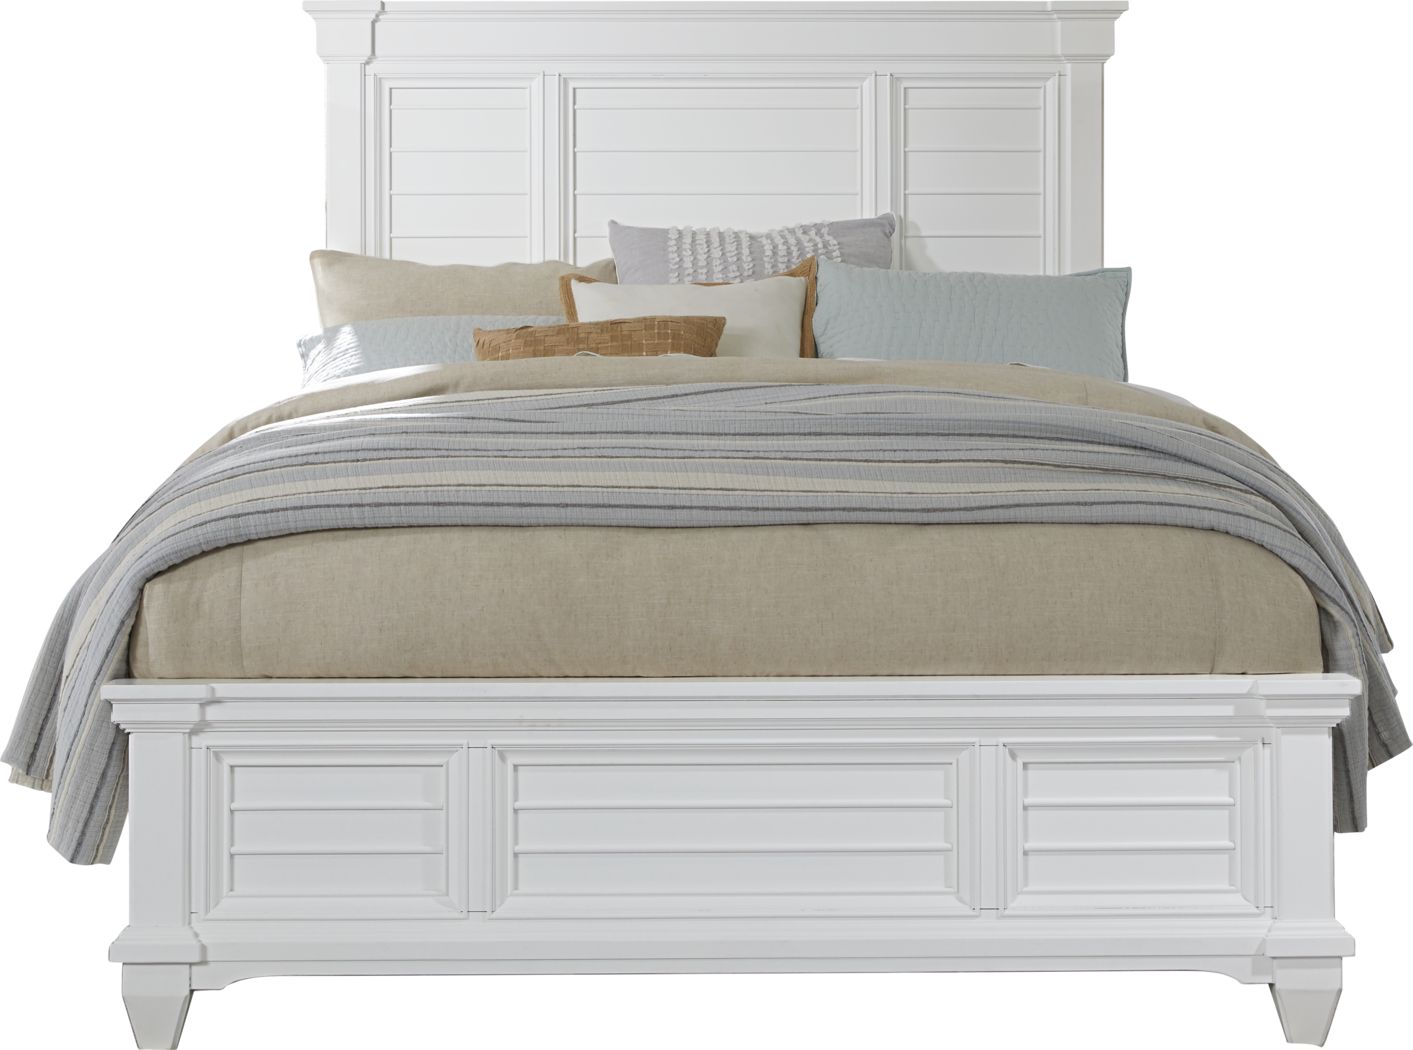 White Queen Size Beds Frames, White And Wood Bed Frame Queen Size